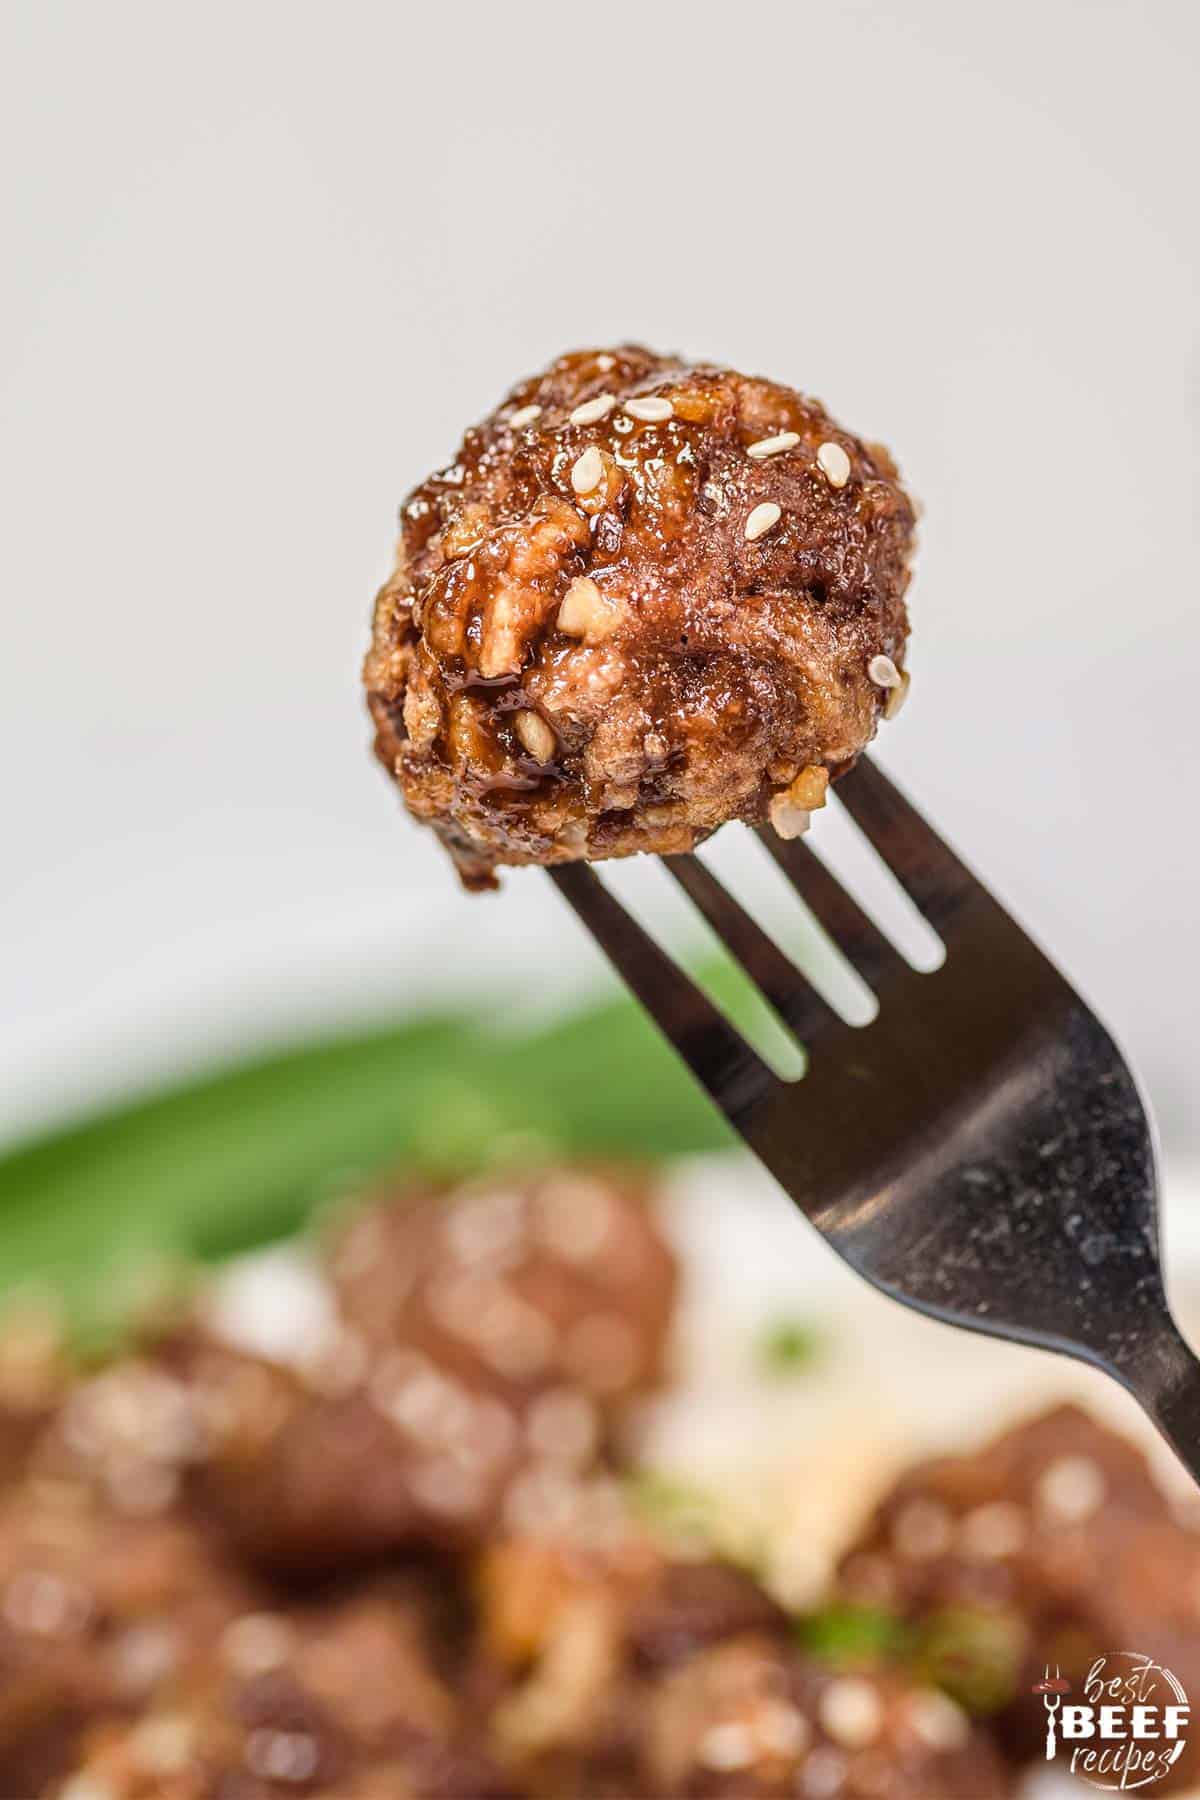 A meatball on a fork up close